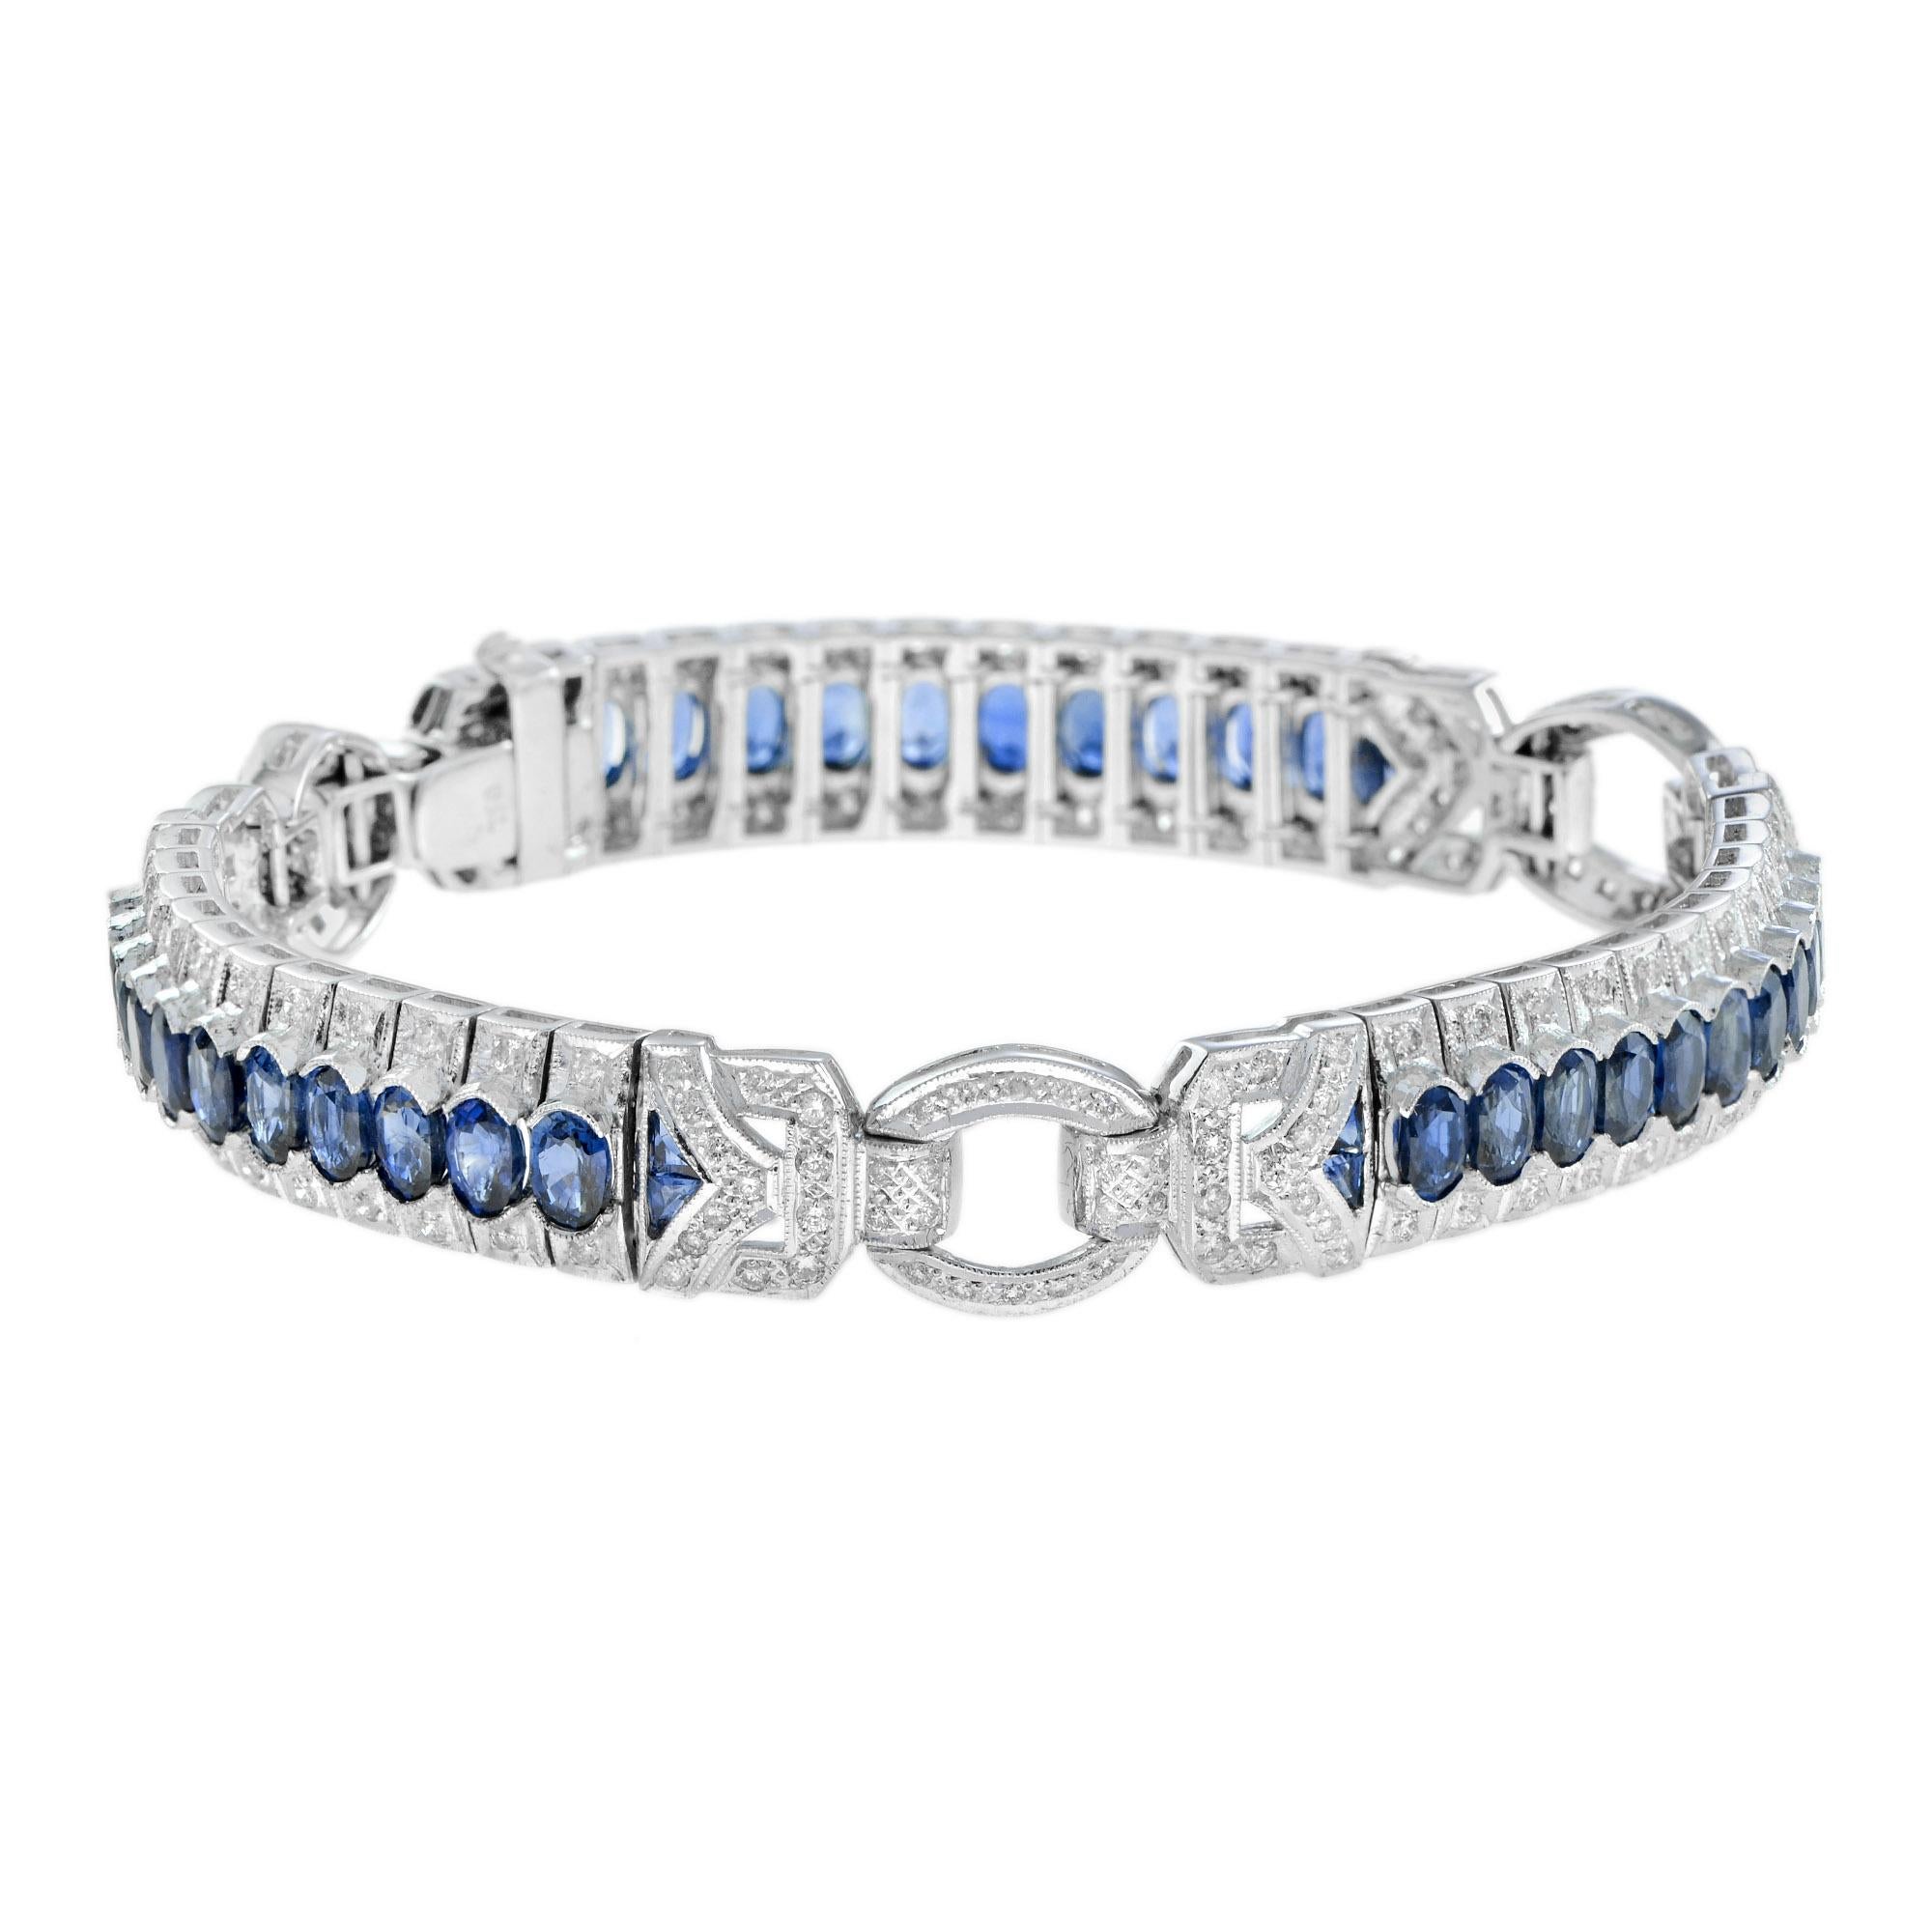 Oval Cut 11.52ct. Oval Sapphire and Diamond Bracelet in 18k White Gold For Sale